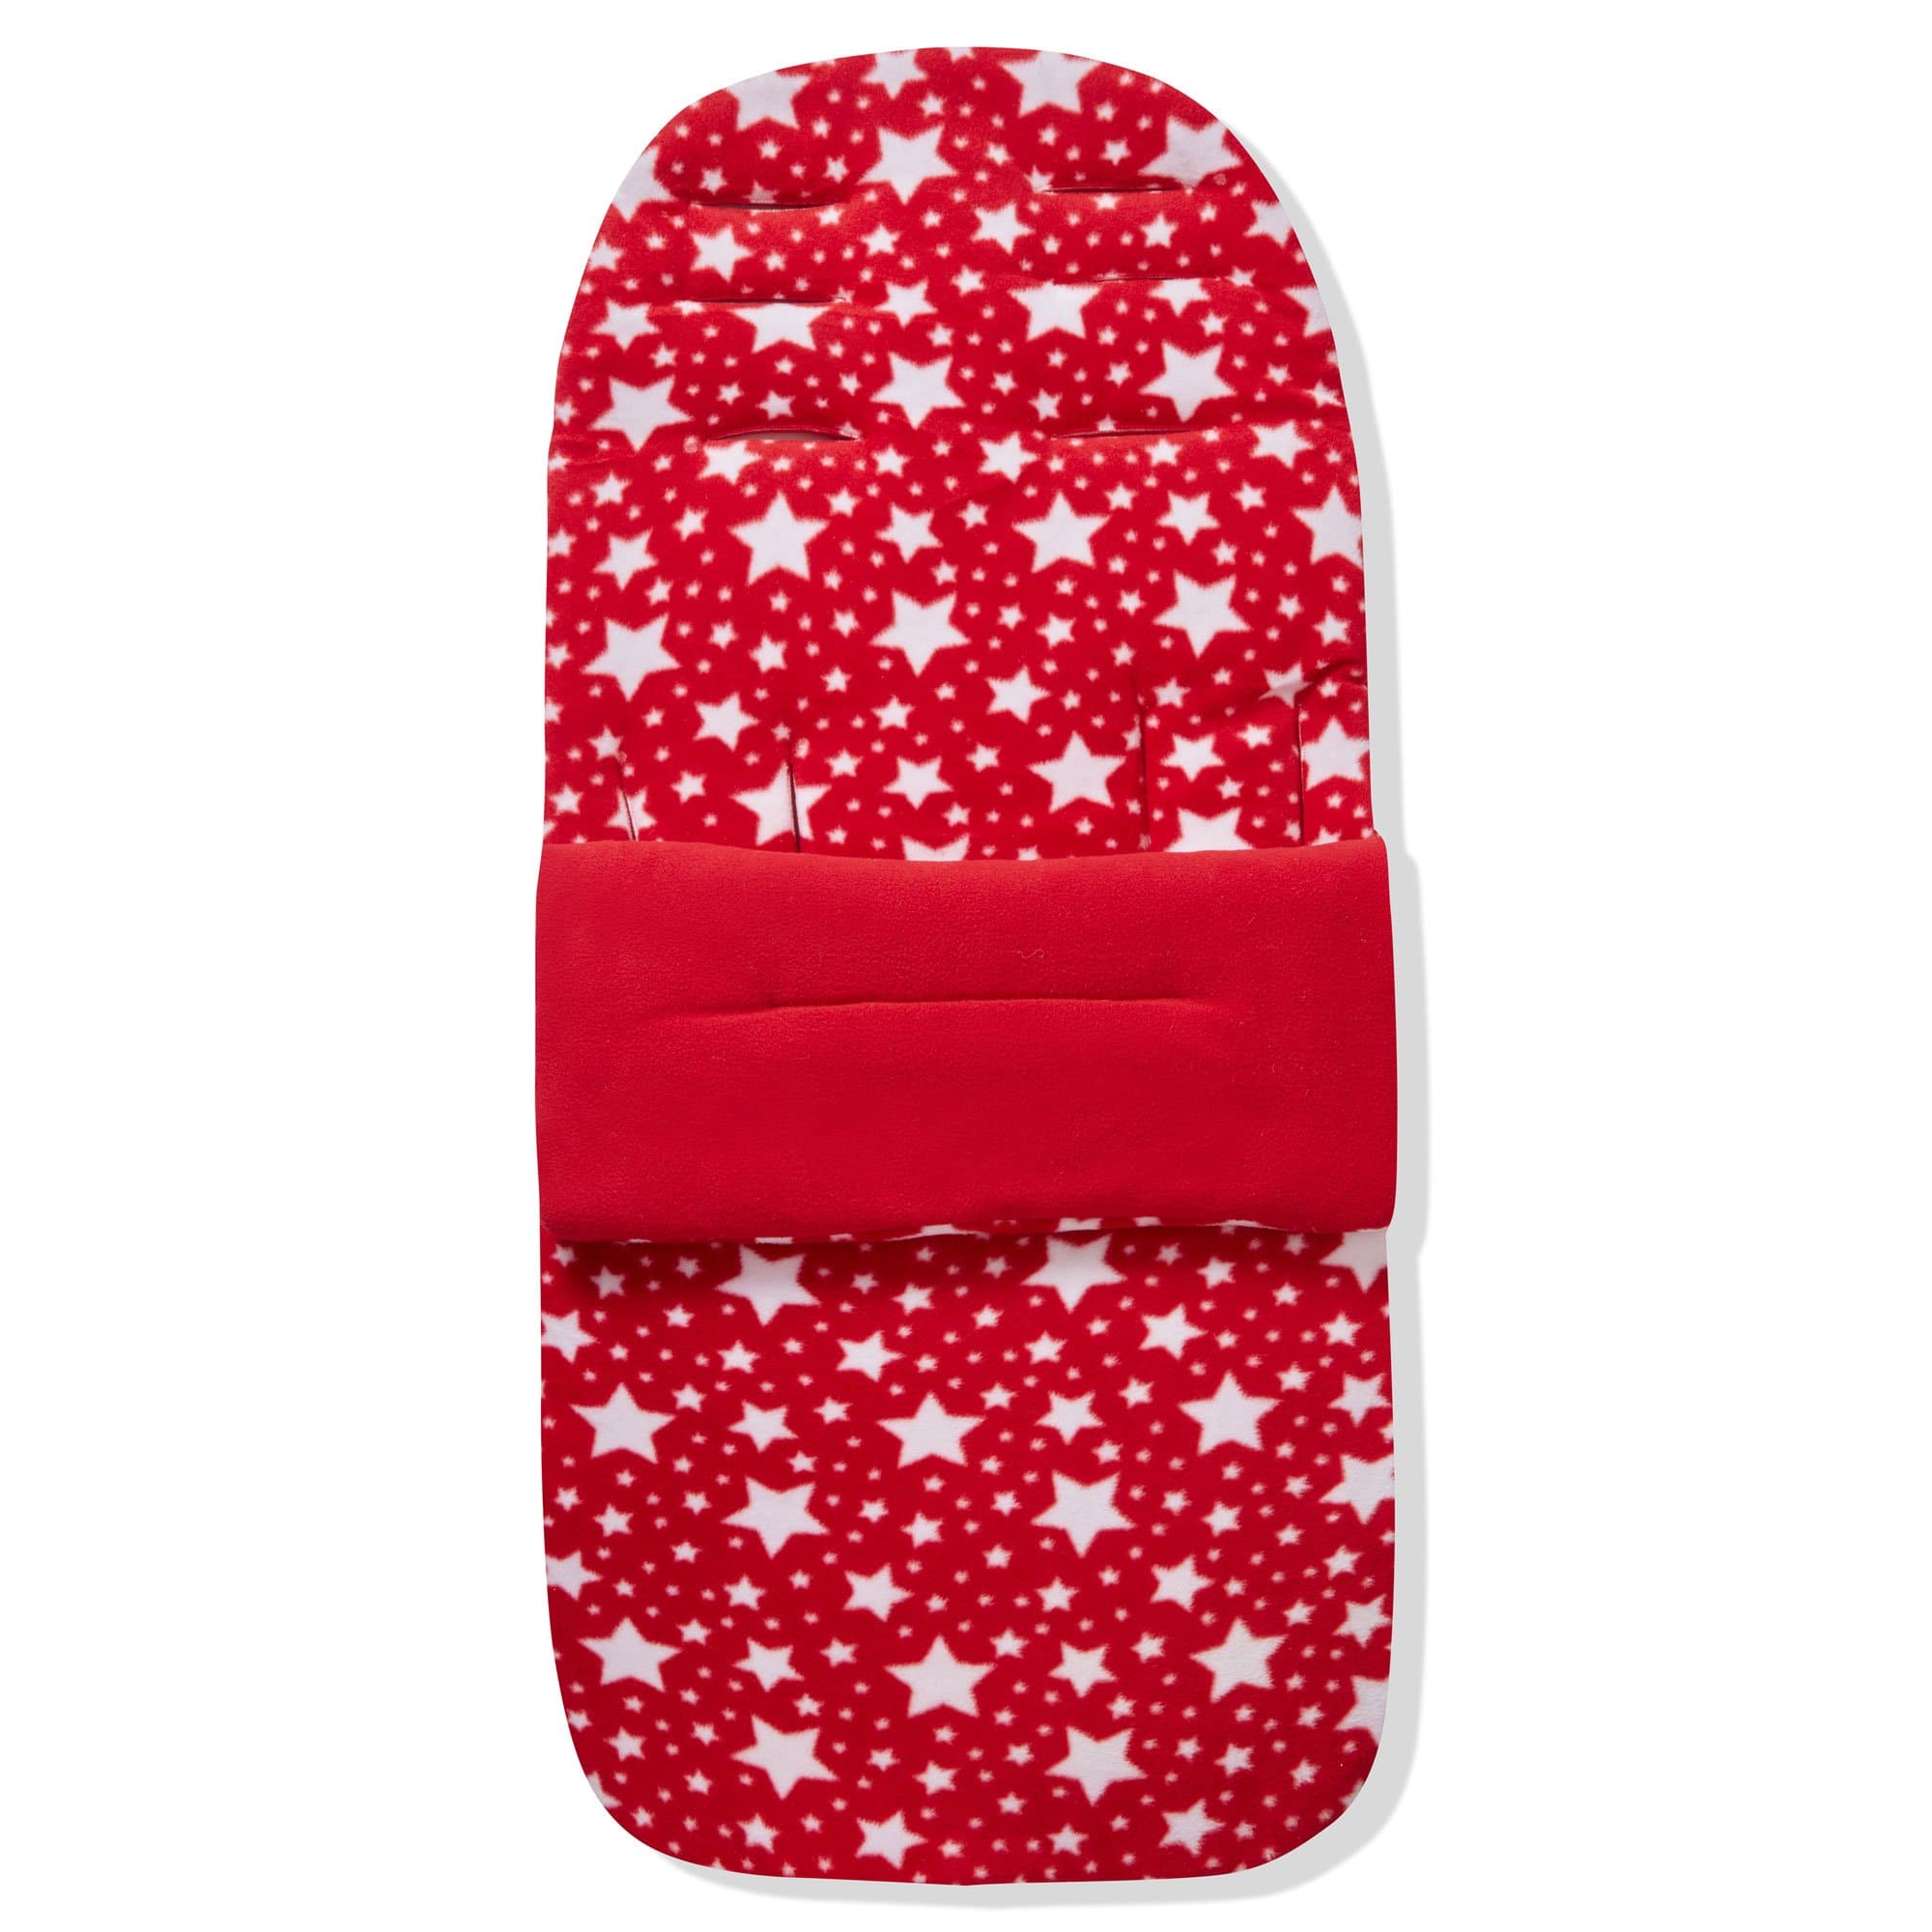 Fleece Footmuff / Cosy Toes Compatible with Baby Elegance - Red Star / Fits All Models | For Your Little One